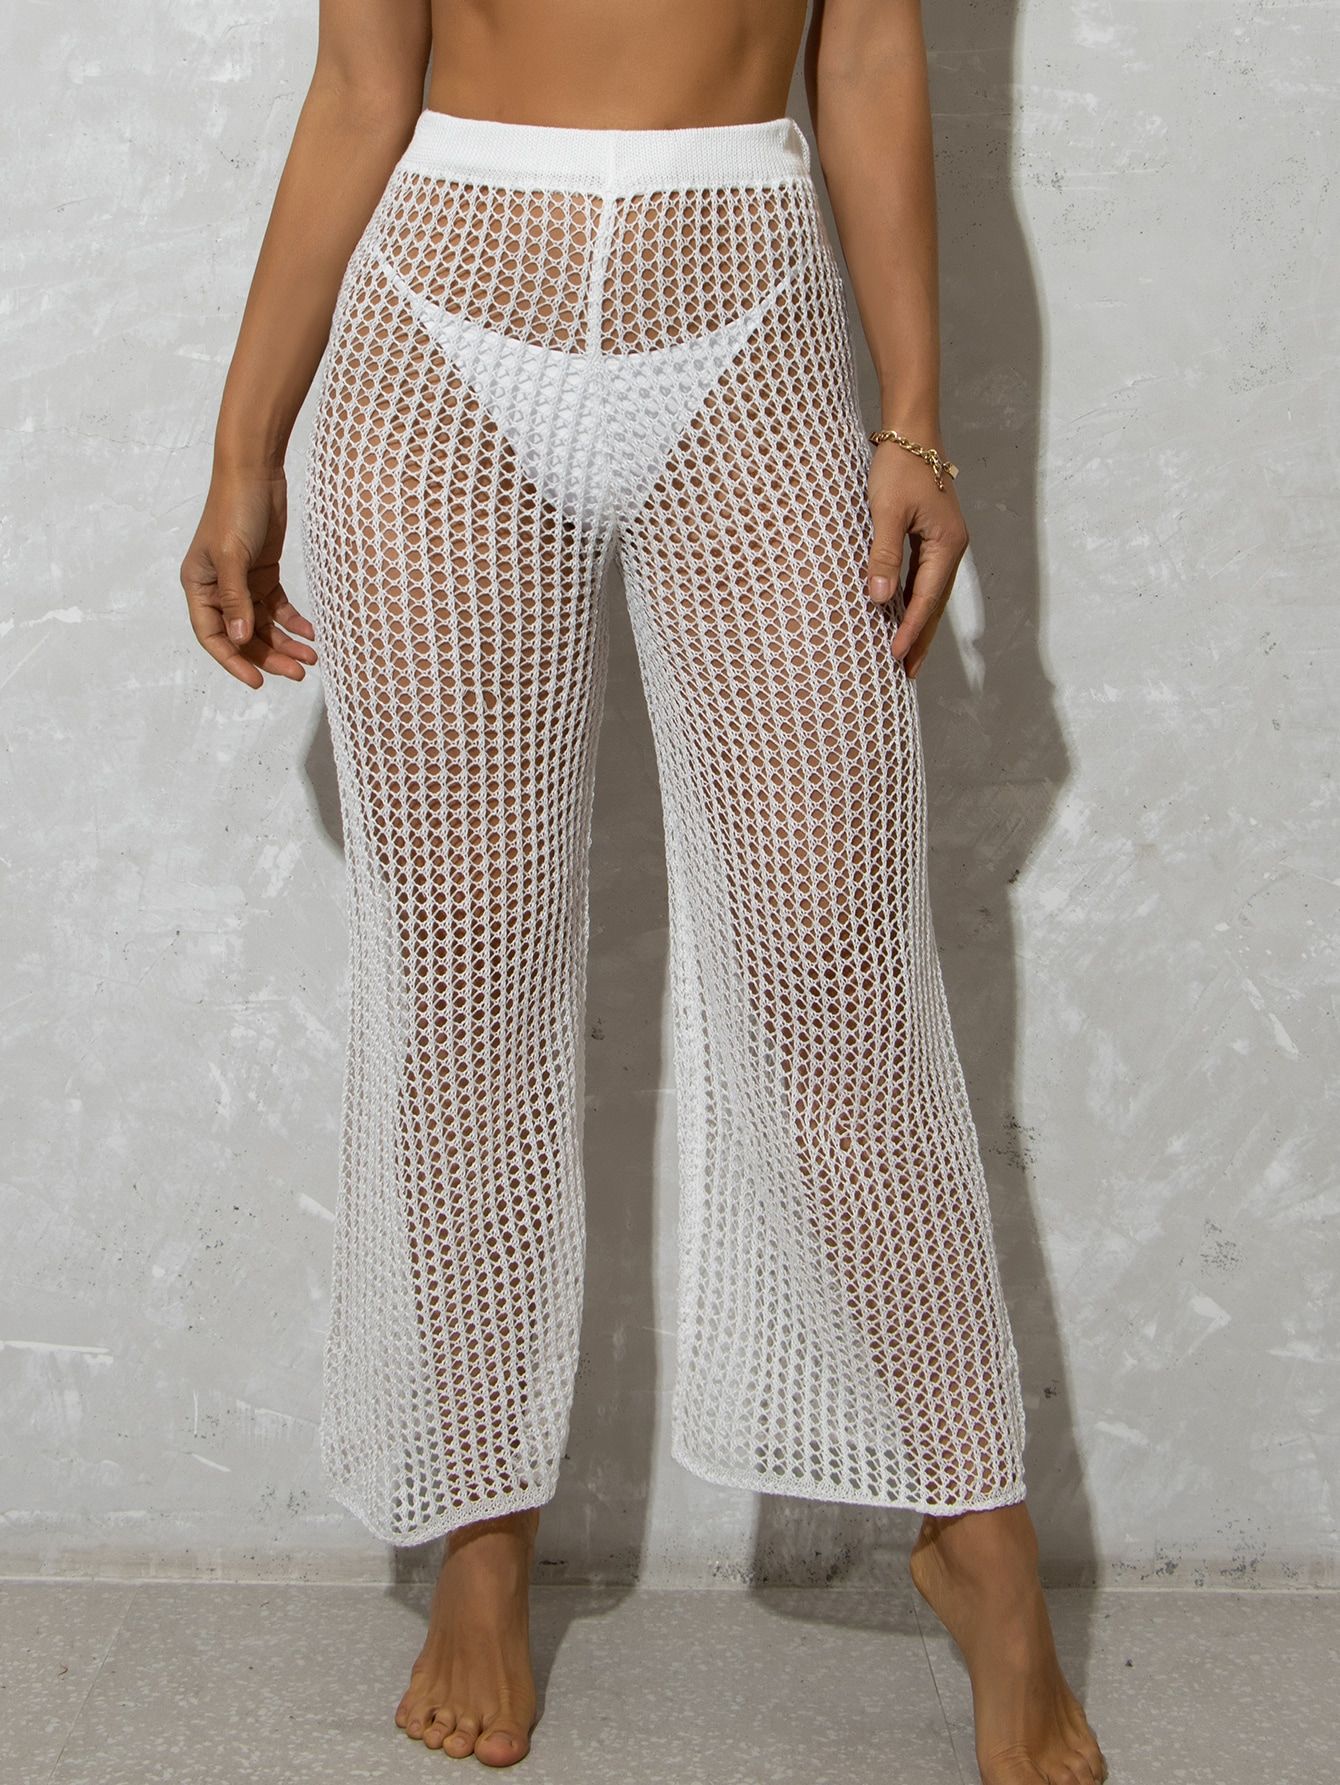 Hollow Out Crochet Cover Up Pants | SHEIN